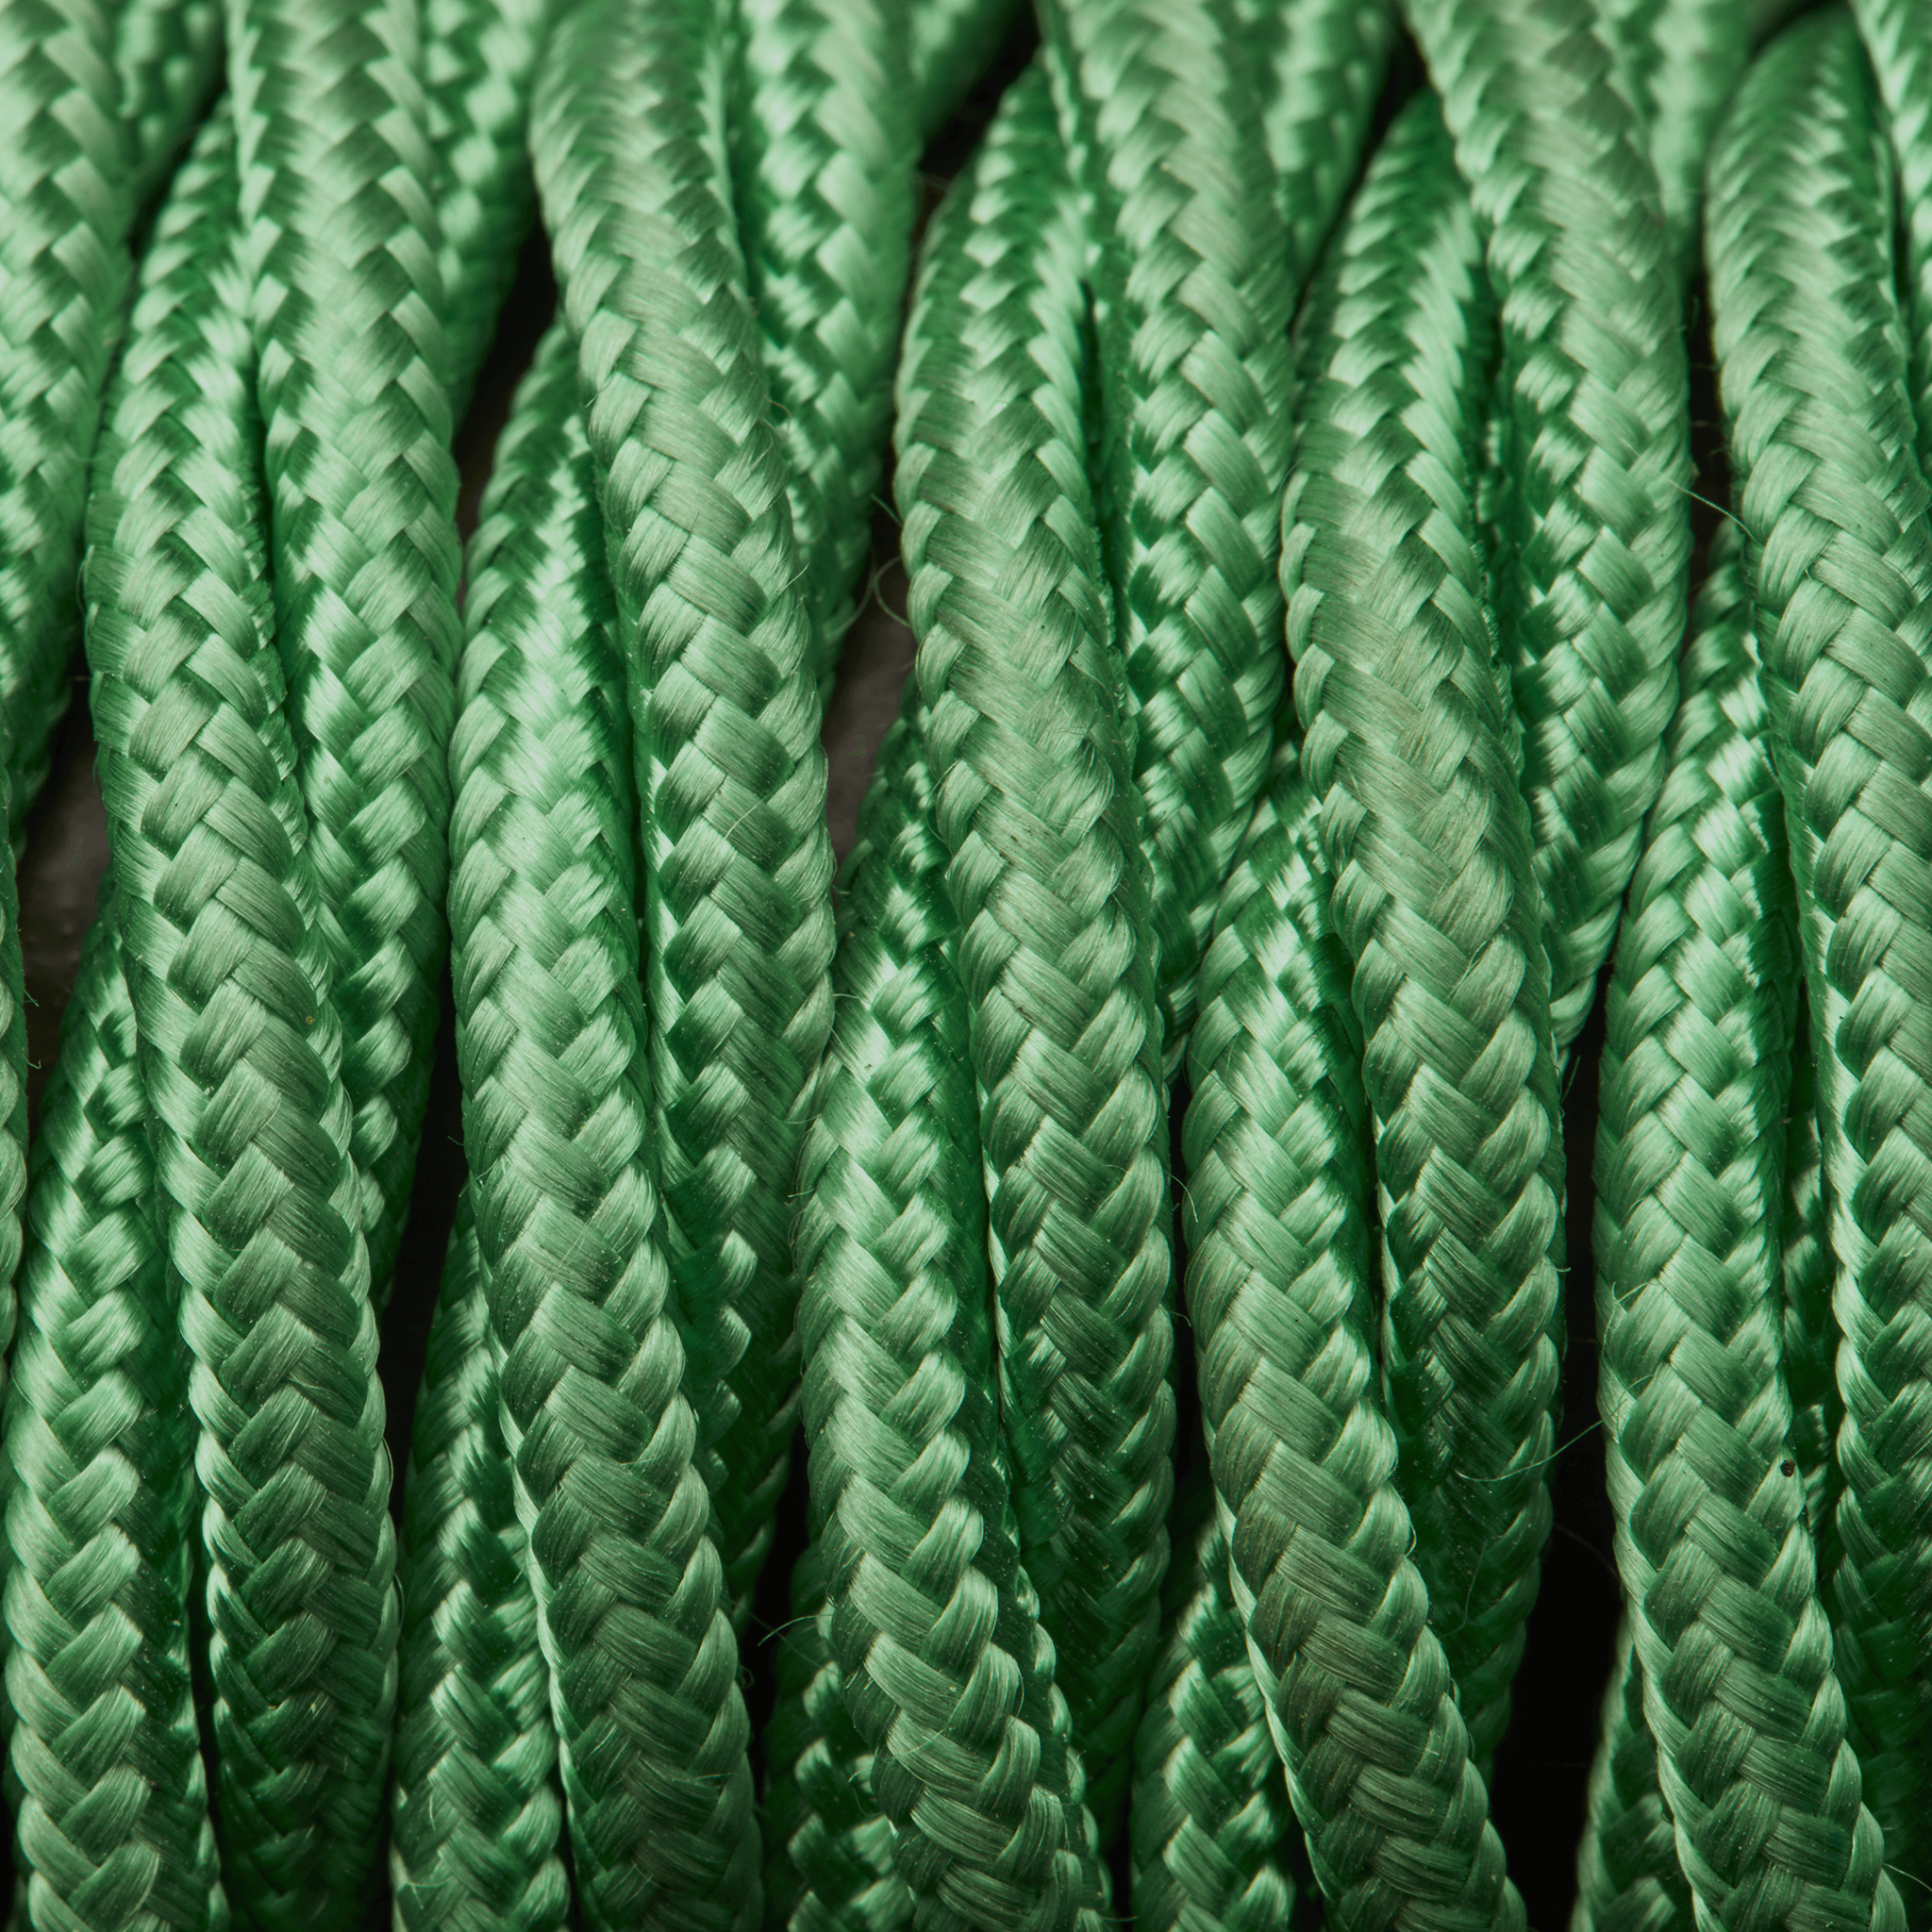 Industville – Twisted Fabric Flex – Braided Cloth Cable Lighting Wire – Fabric Flex Cable – Green Colour – Braided Woven Cloth Material – 100 CM